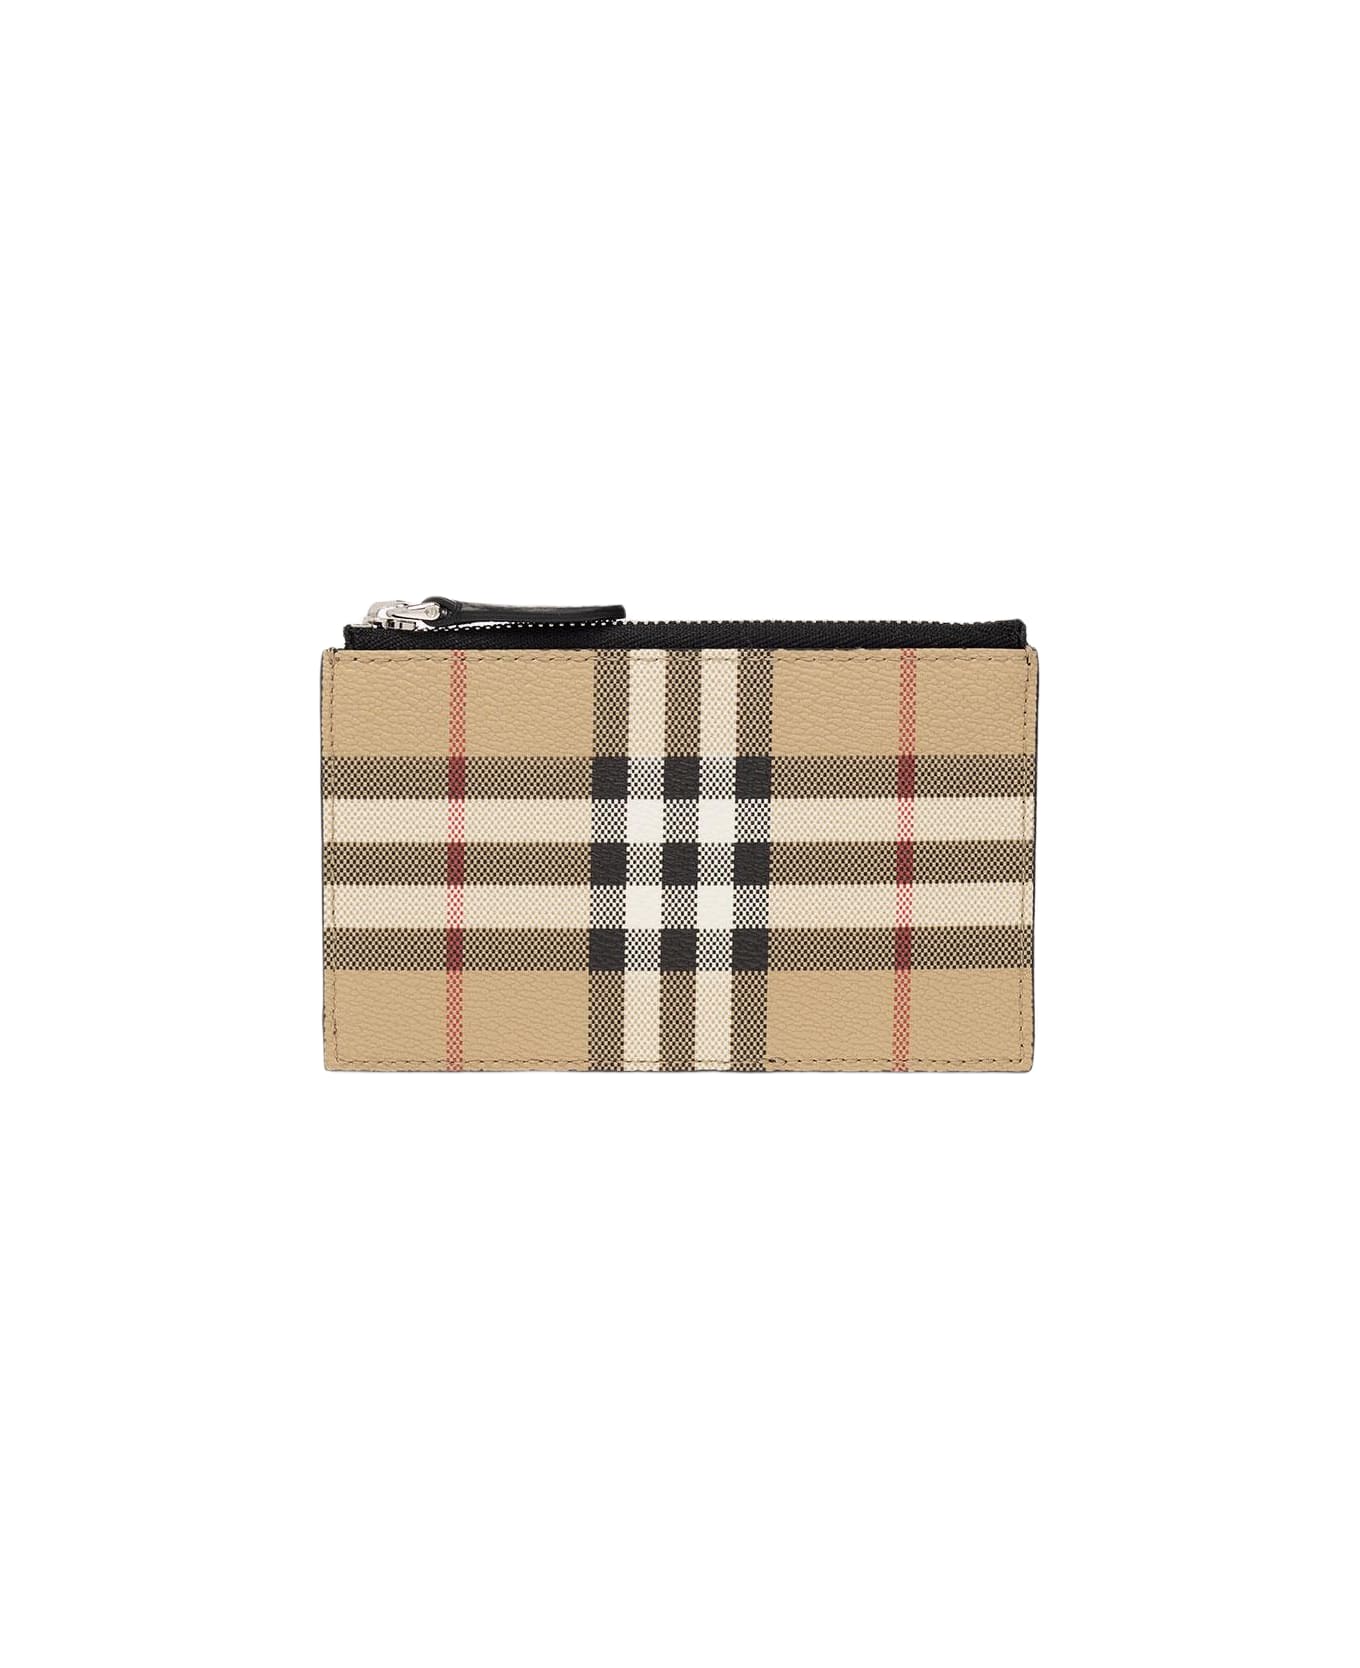 Burberry Card Holder - Archive Beige 財布